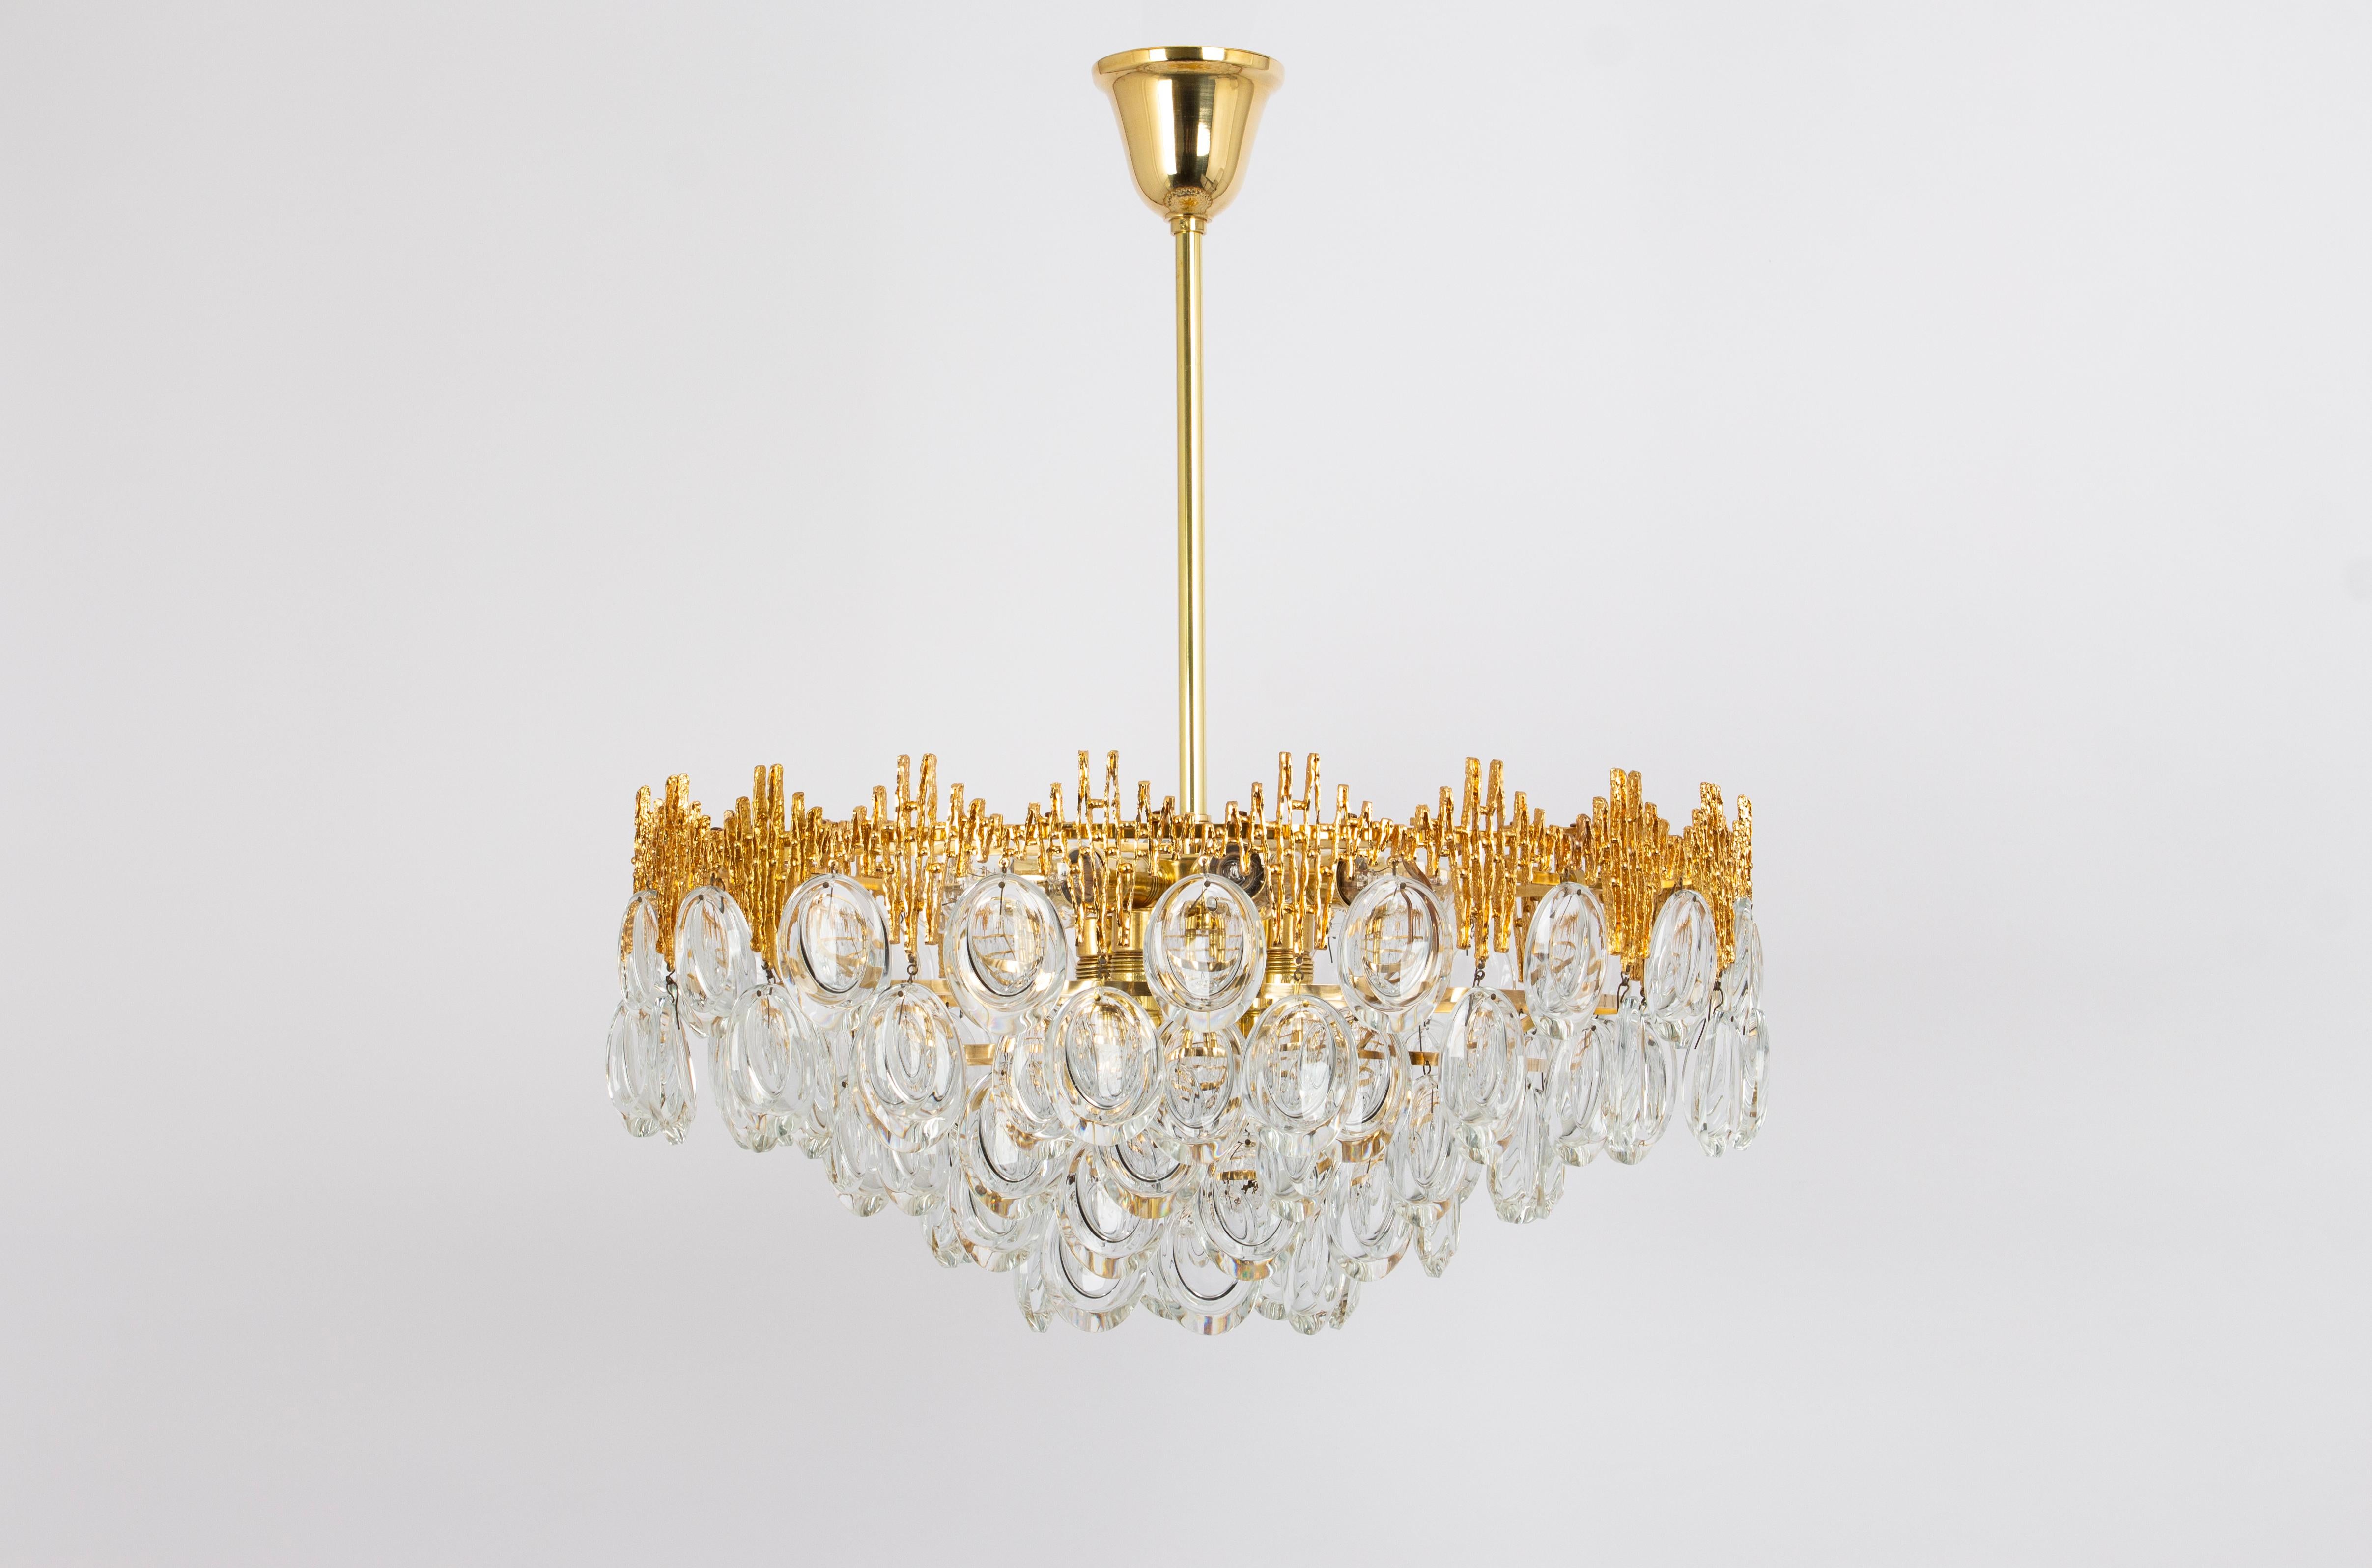 An outstanding and high-quality chandelier made by Palwa, Germany, 1970s.

It is made of a  brass frame decorated with individual Crystal glasses .
Multiple tiers of crystals. Great scale and exquisite detail.

High quality and in very good